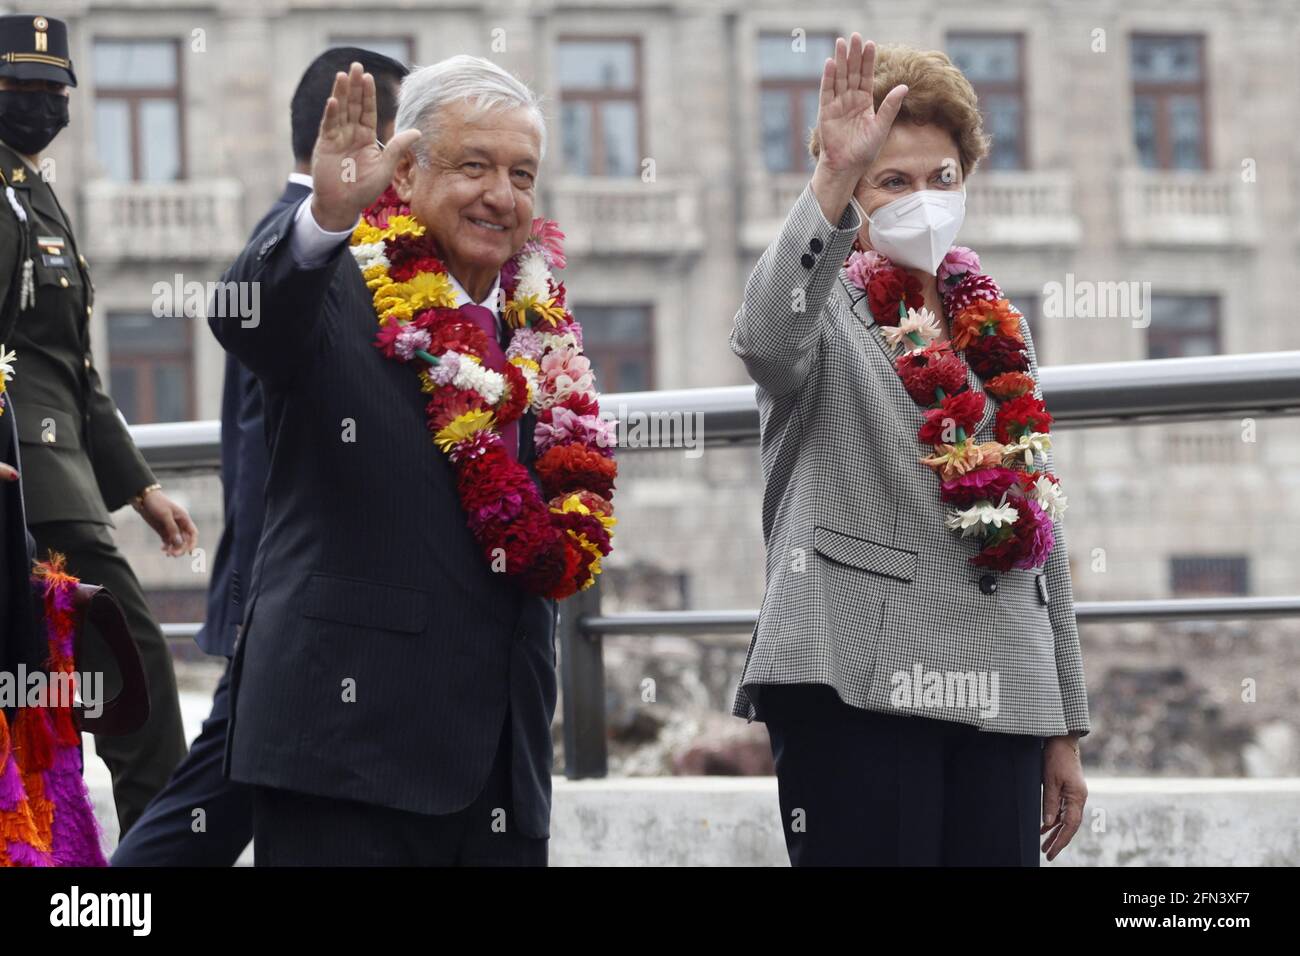 Mexico City, Mexico. 13th May, 2021. Mexico's President, Andres Manuel Lopez Obrador, accompanied by the former president of Brazil, Dilma Rousseff, during ceremony for the 700 years of the founding of Tenochtitlan at the Museo del Templo Mayor on May 13, 2021 in Mexico City, Mexico. Photo by Luis Barron/Eyepix/ABACAPRESS.COM Credit: Abaca Press/Alamy Live News Stock Photo